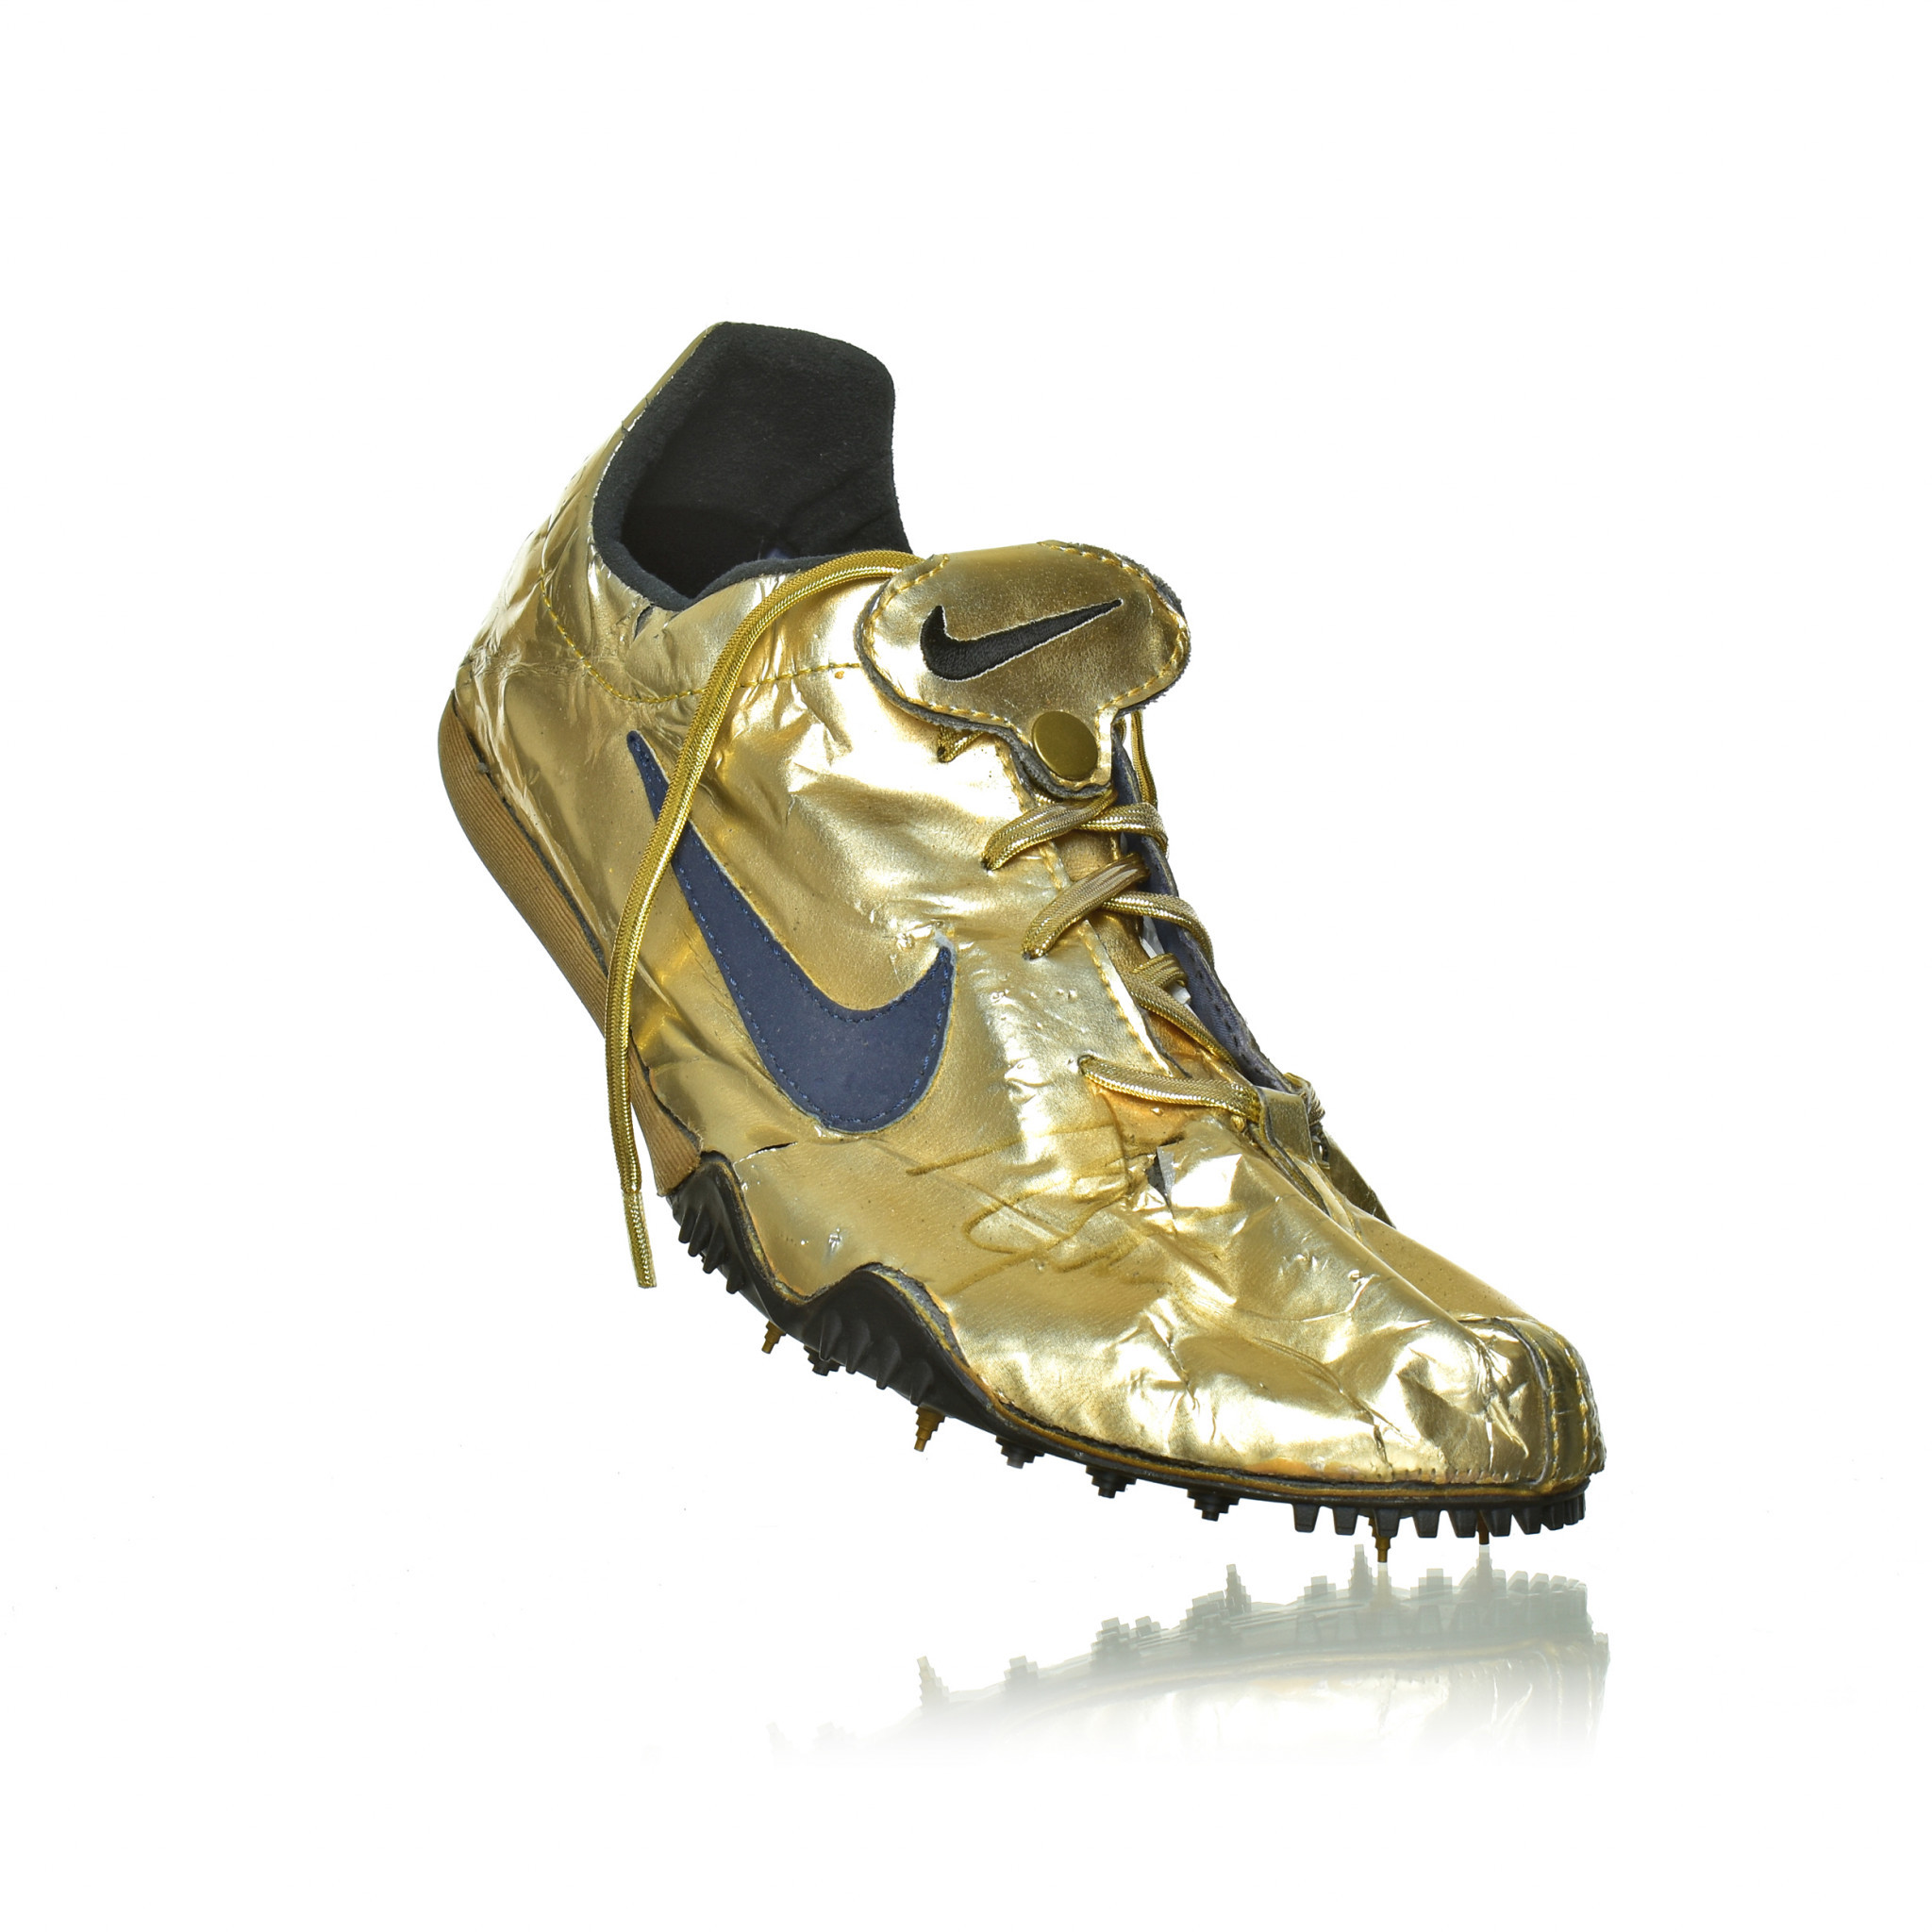 A golden shoe worn by Michael Johnson at the 1996 Atlanta Olympics - one of three such shoes which form the latest prize possession of the World Athletics Heritage Collection ©MOWA